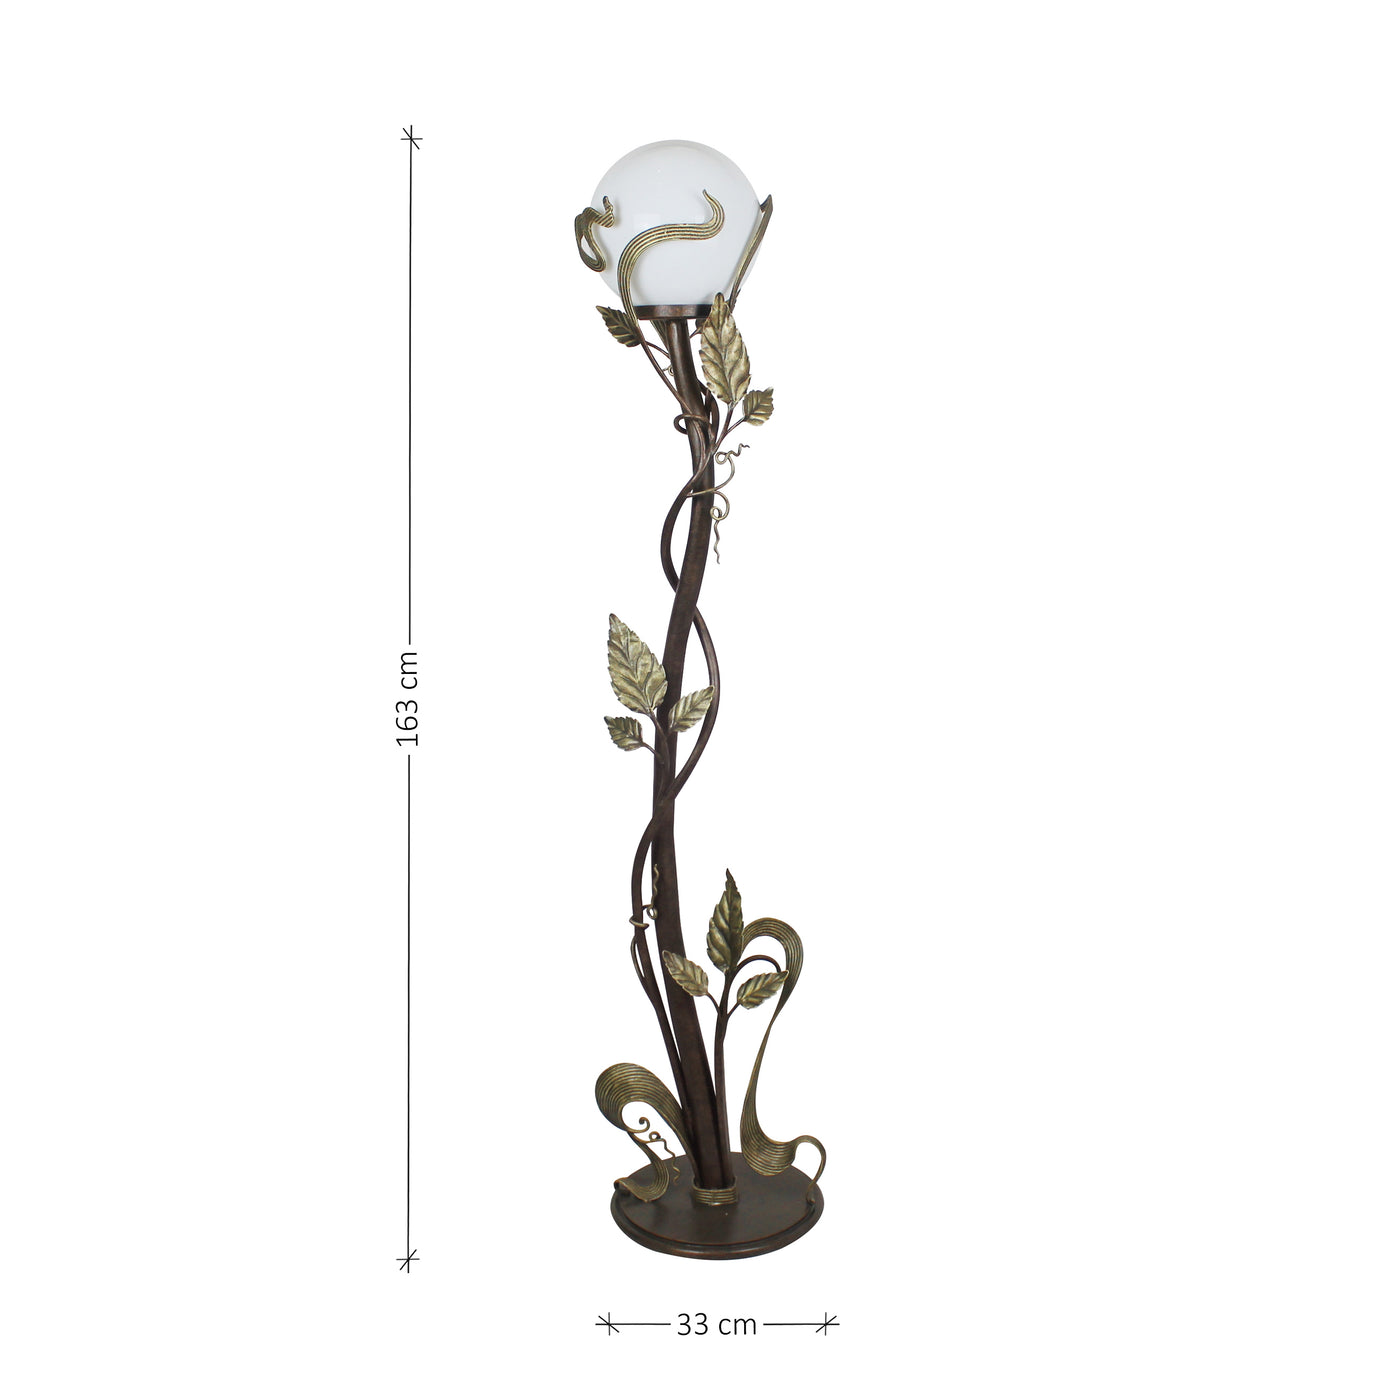 A unique handmade metal decorative floor lamp made up of stems and leaves, with annotated dimensions